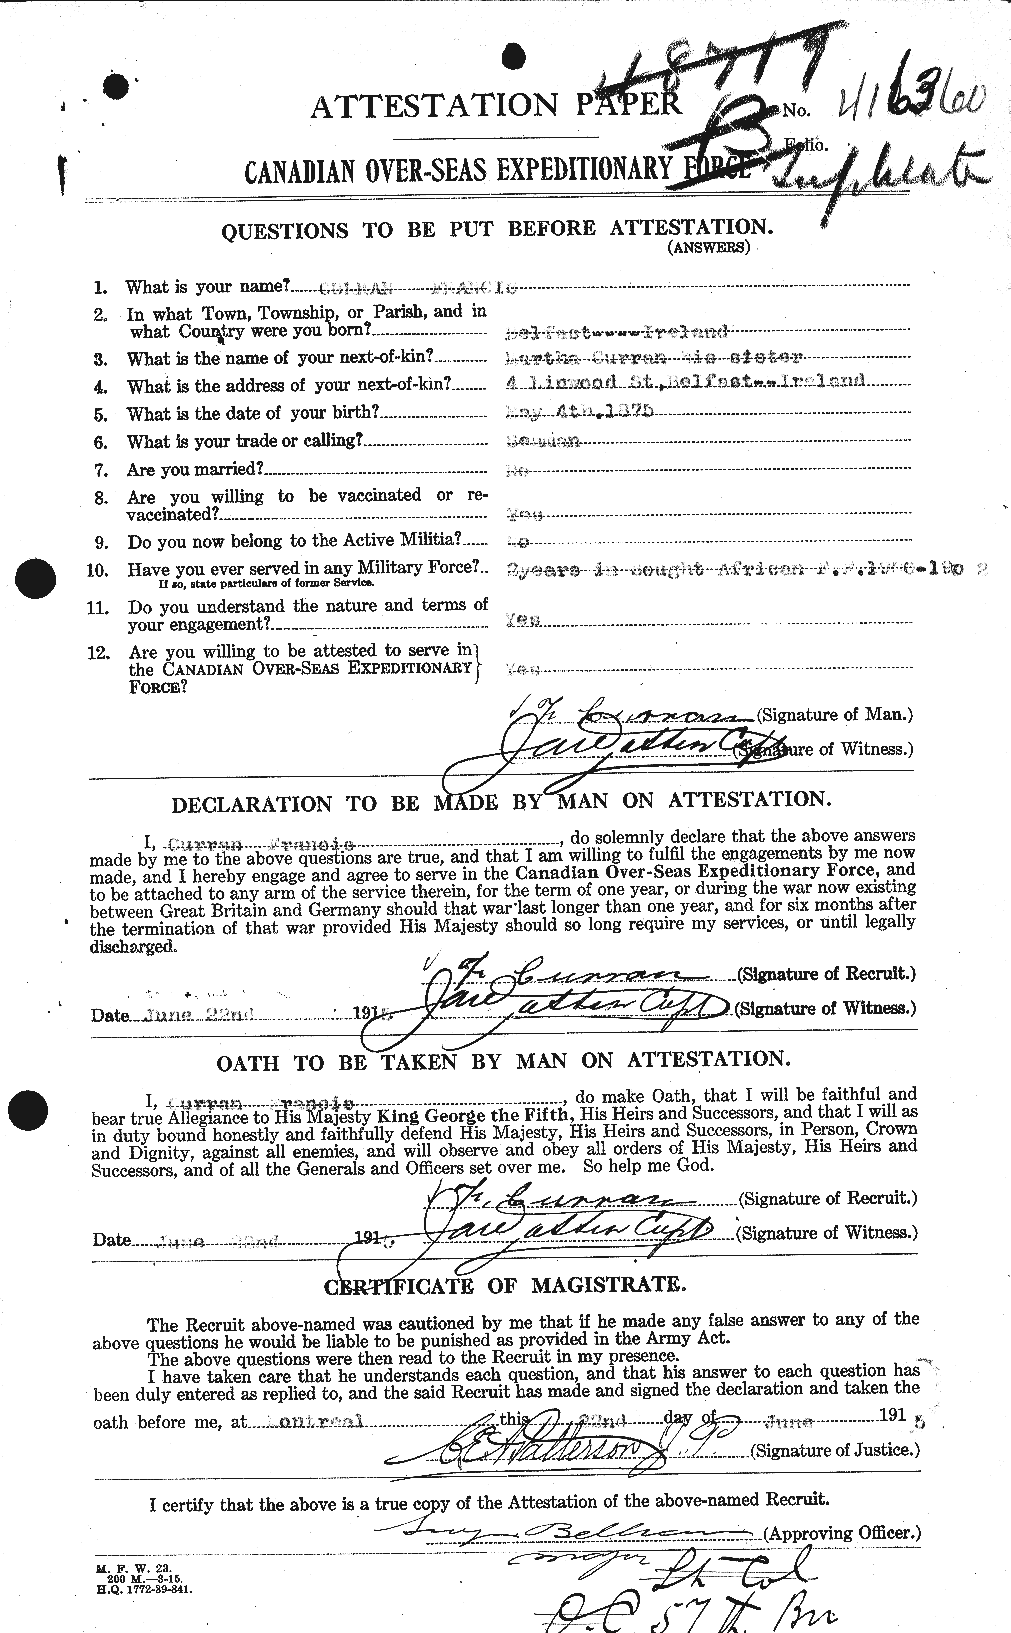 Personnel Records of the First World War - CEF 074576a